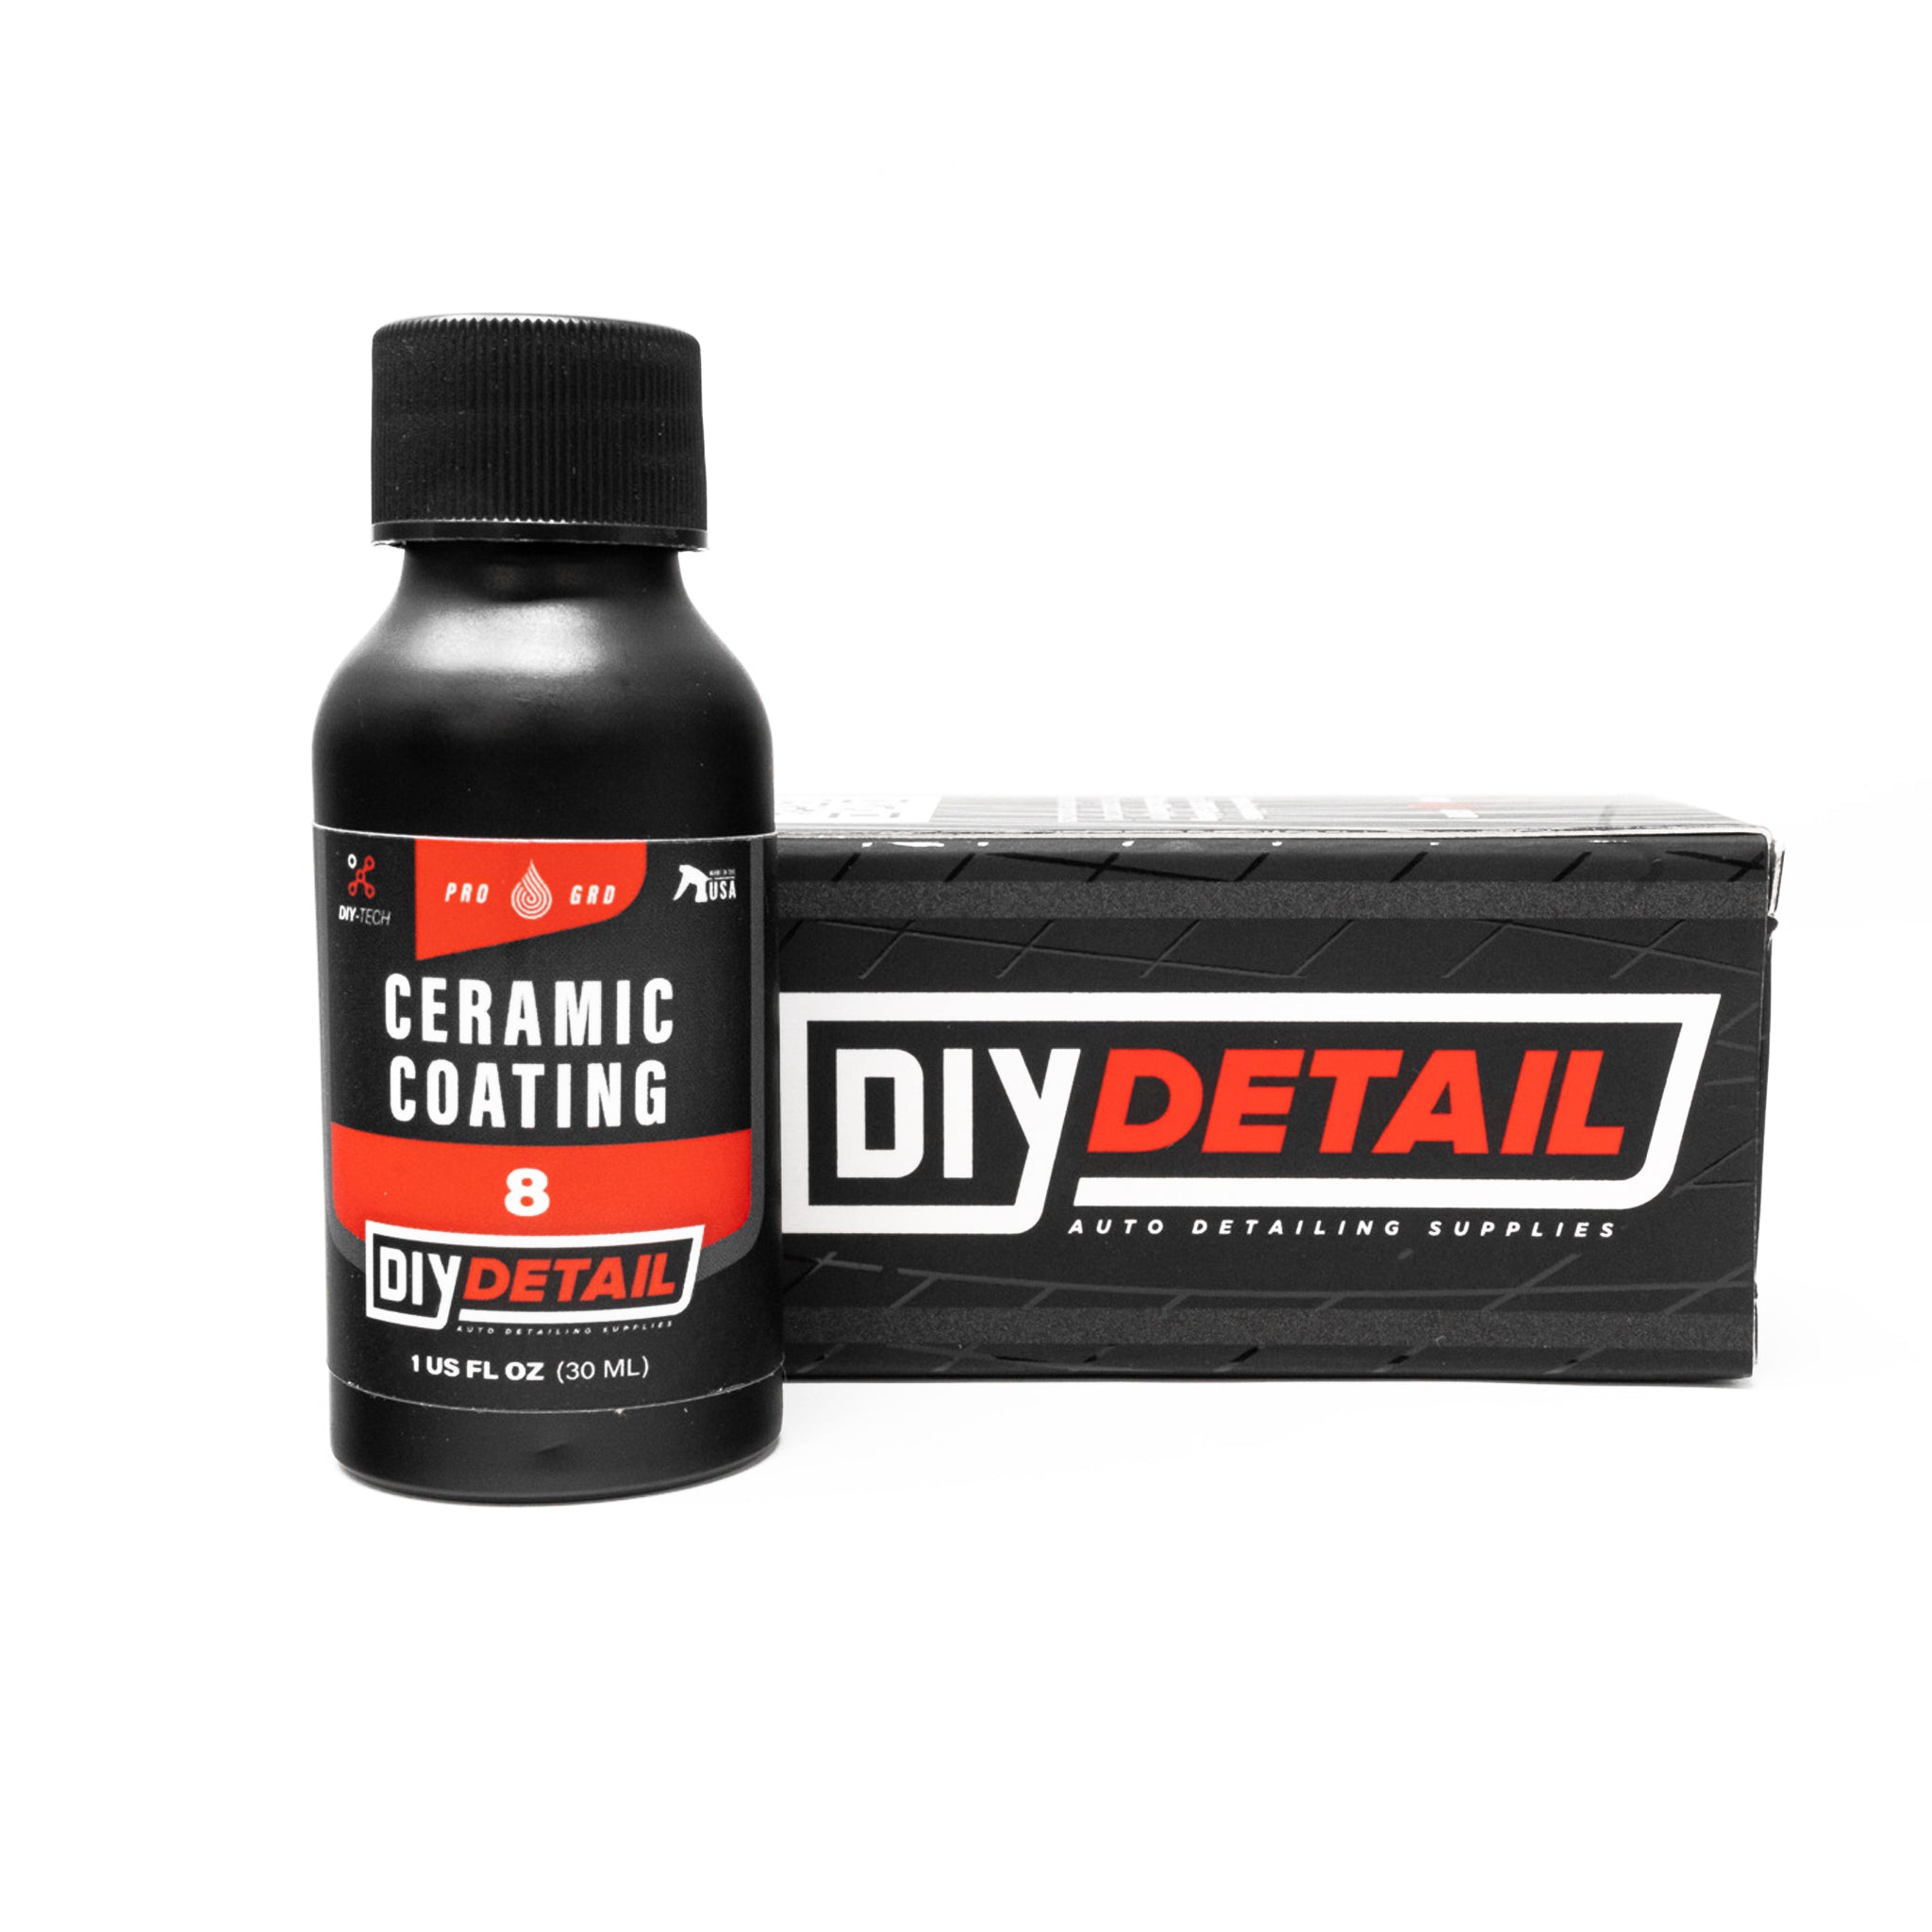 Ceramic Coating (Case of 4 Ready-to-Use Gallons) - DOWC